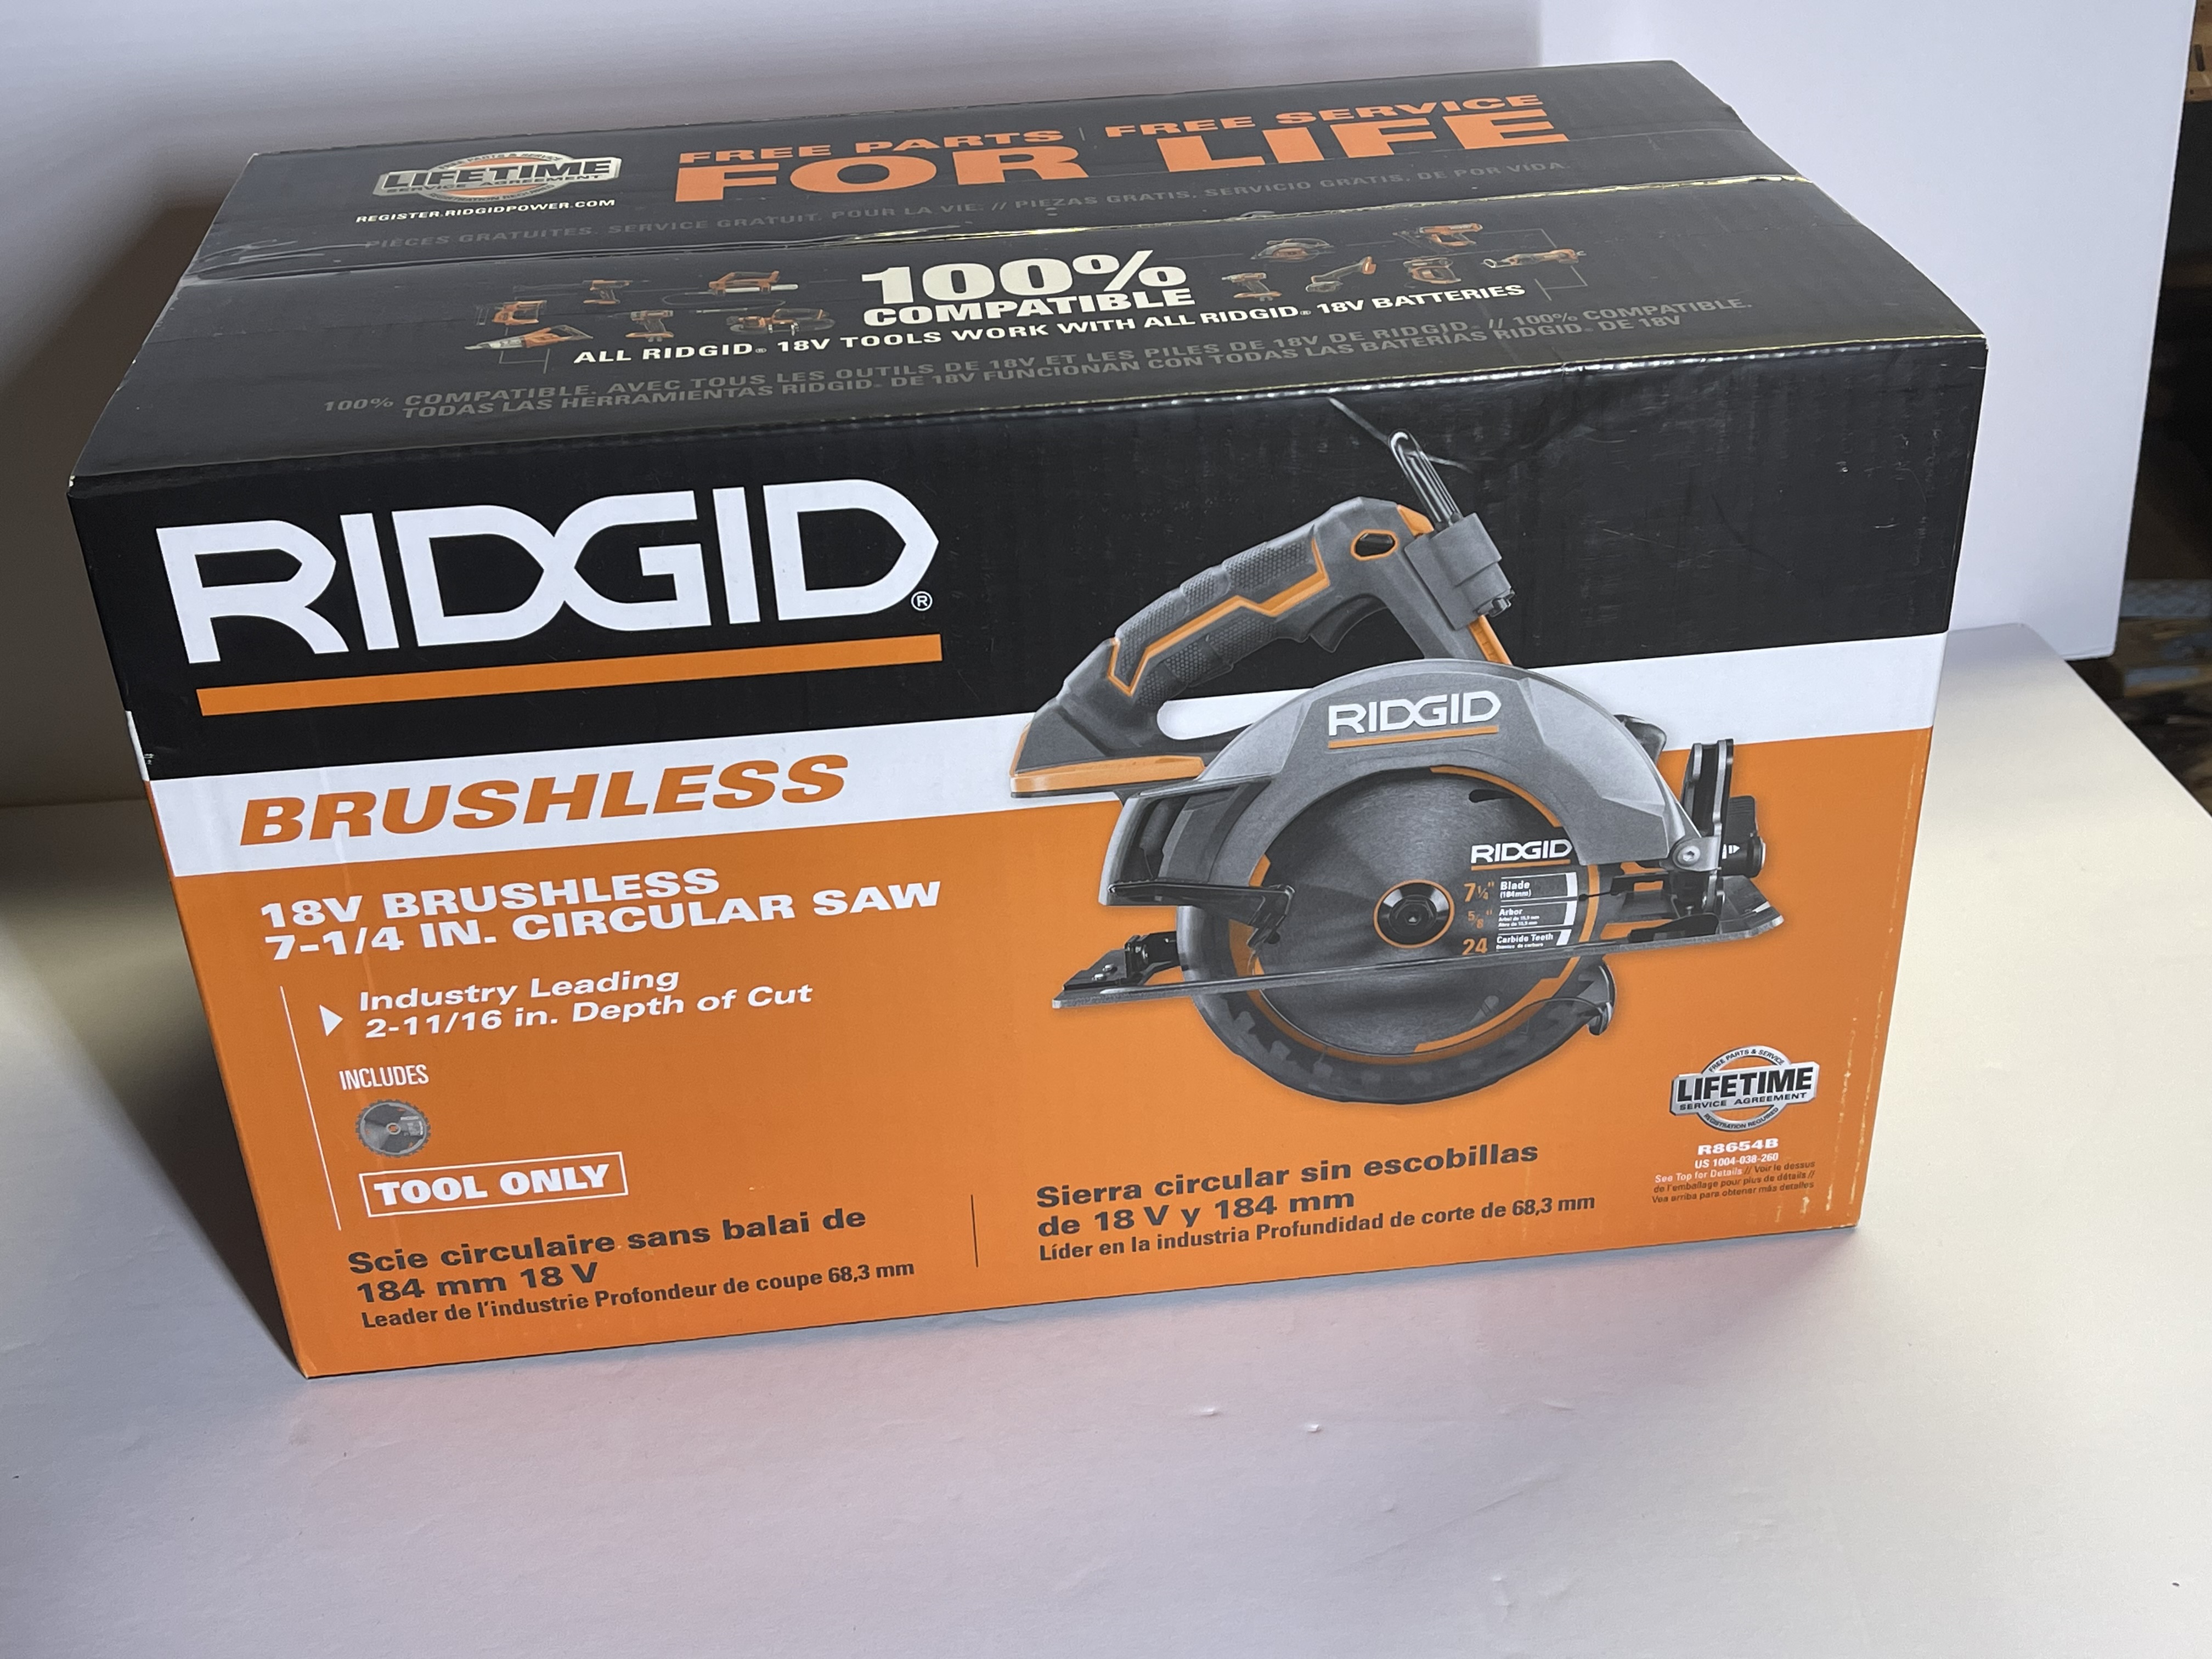 RIDGID R8654B 18V Brushless Cordless 7-1/4 in. Circular Saw (Tool Only  Battery  Charger sold separately), Brand new in box, Free Shipping.  Lazada PH